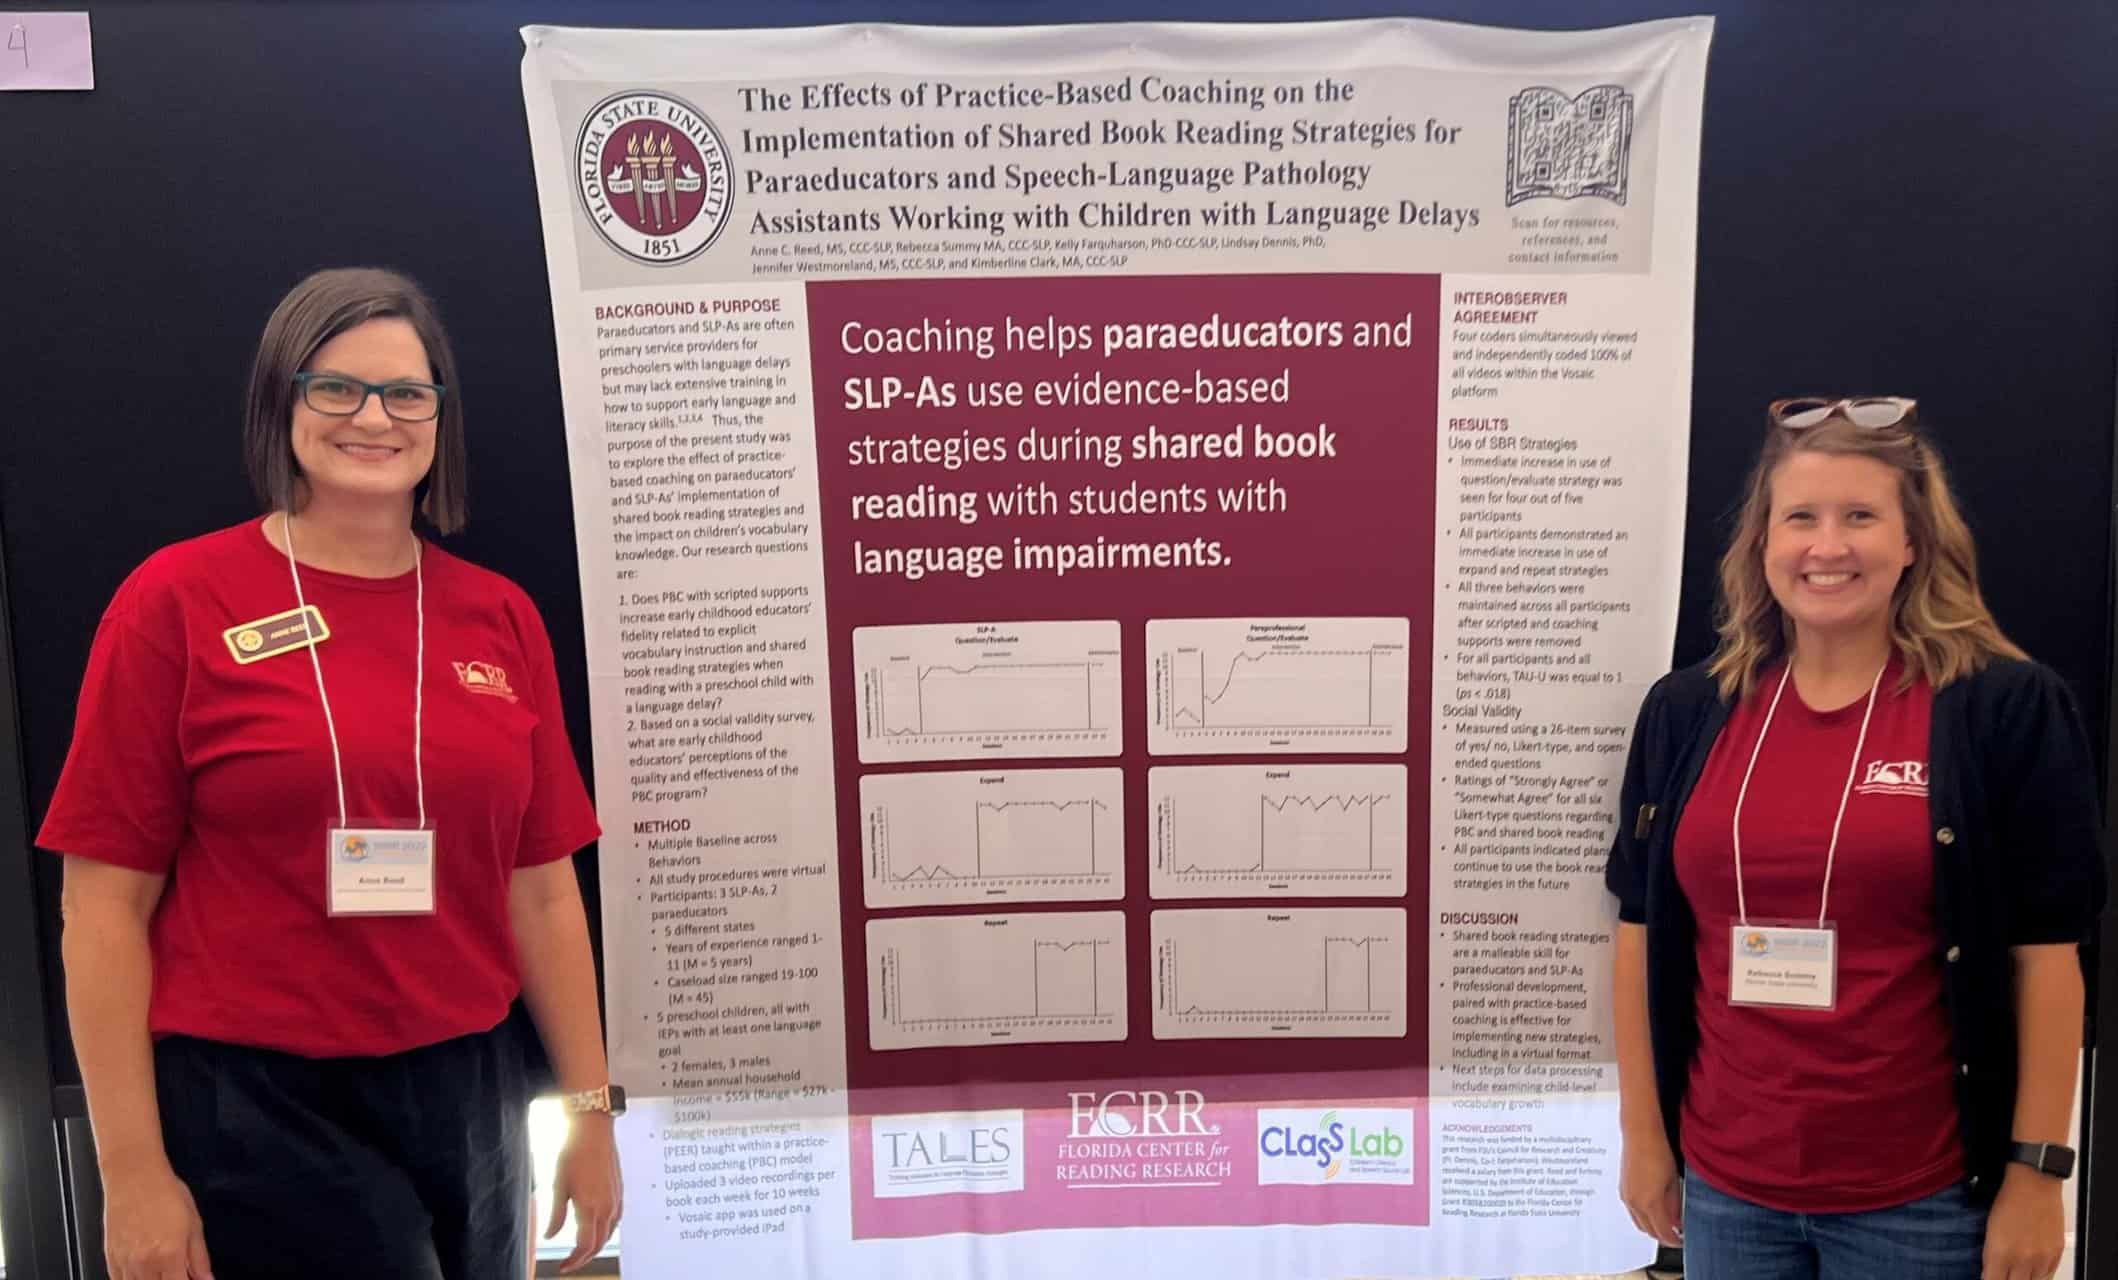 Anne Reed and Rebecca Summy with their poster presentation at the Society for the Scientific Study of Reading (SSSR) Conference in Newport Beach, CA in July